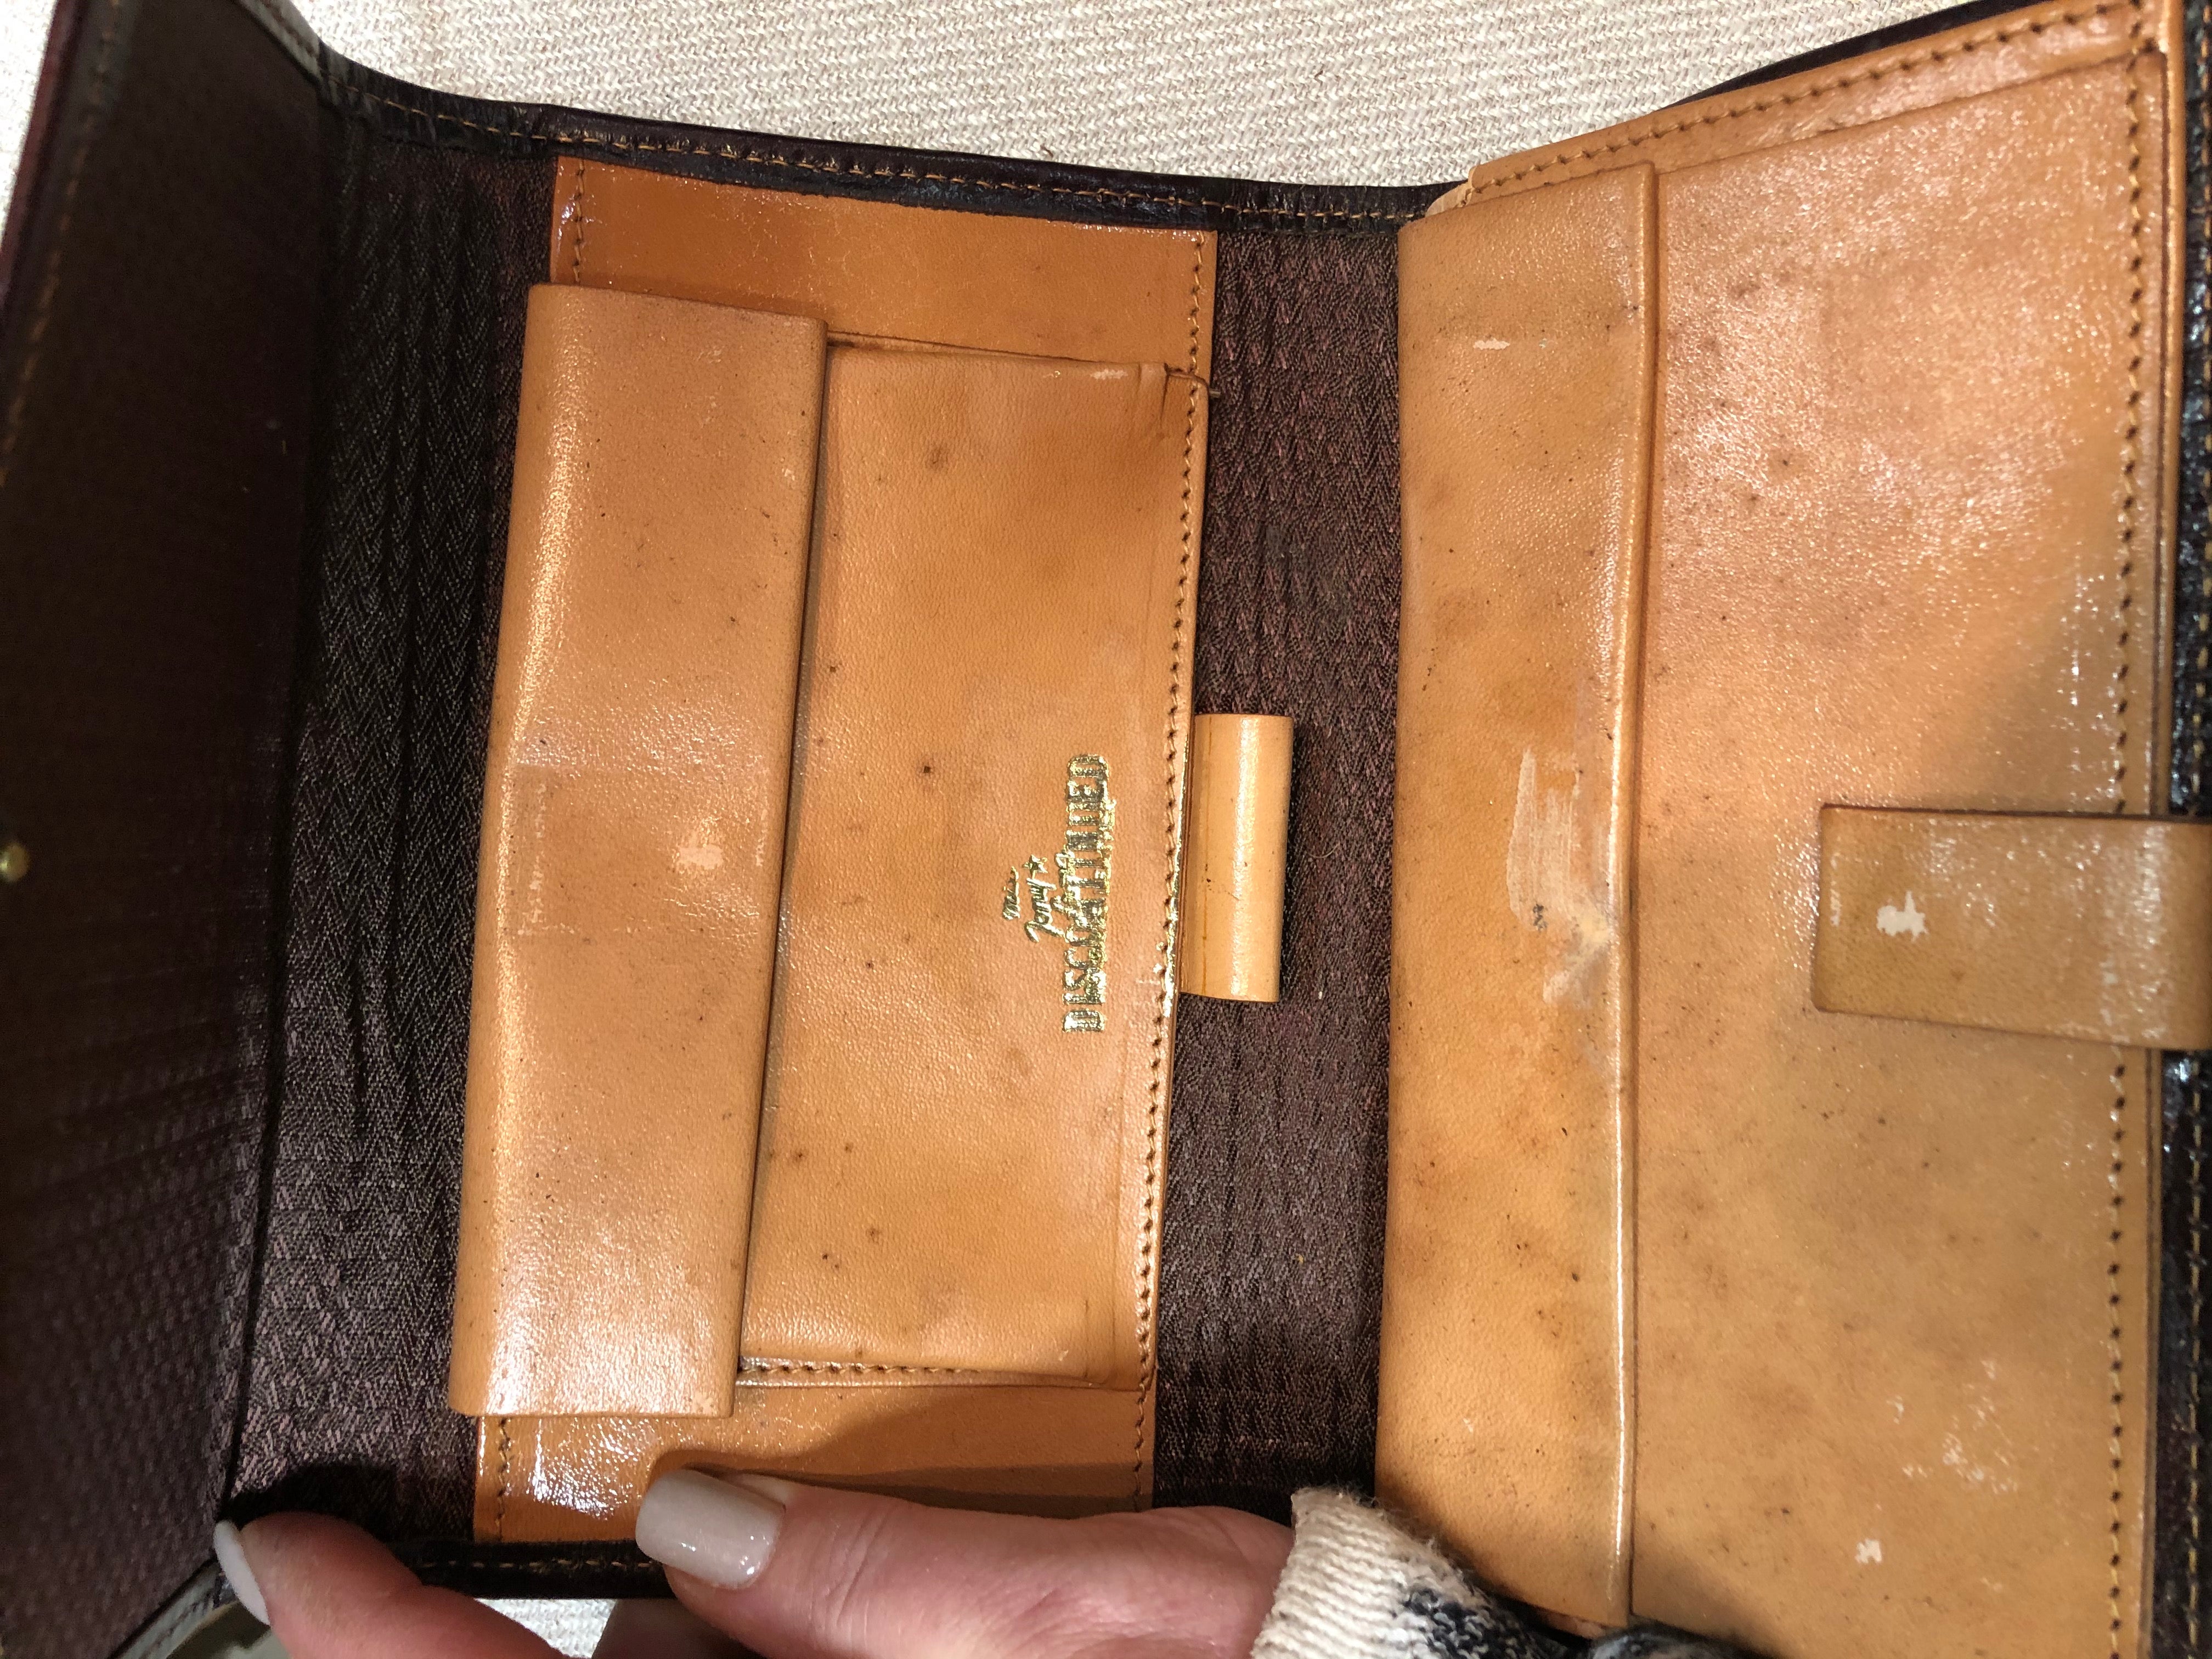 Butch Cassidy and Sundance Vintage Wallet